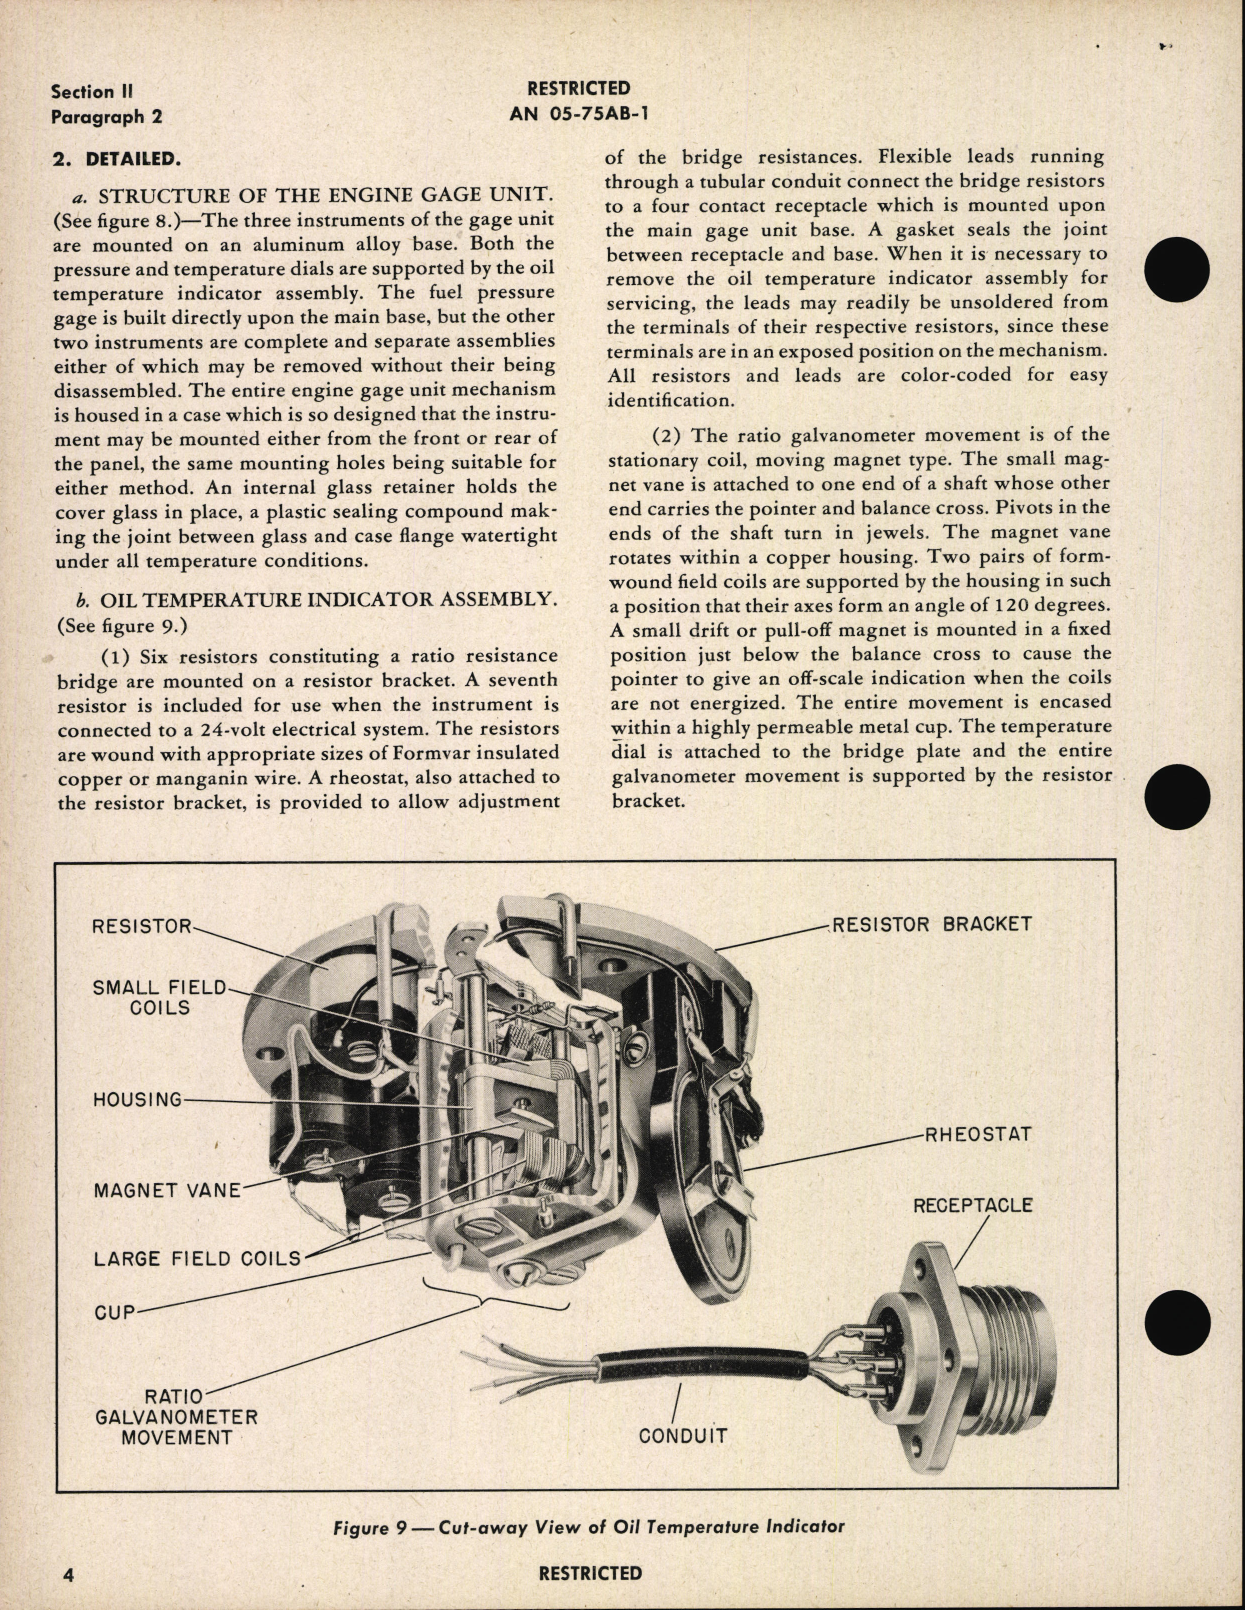 Sample page 8 from AirCorps Library document: Operation, Service, & Overhaul Instructions with Parts Catalog for Engine Gage Units